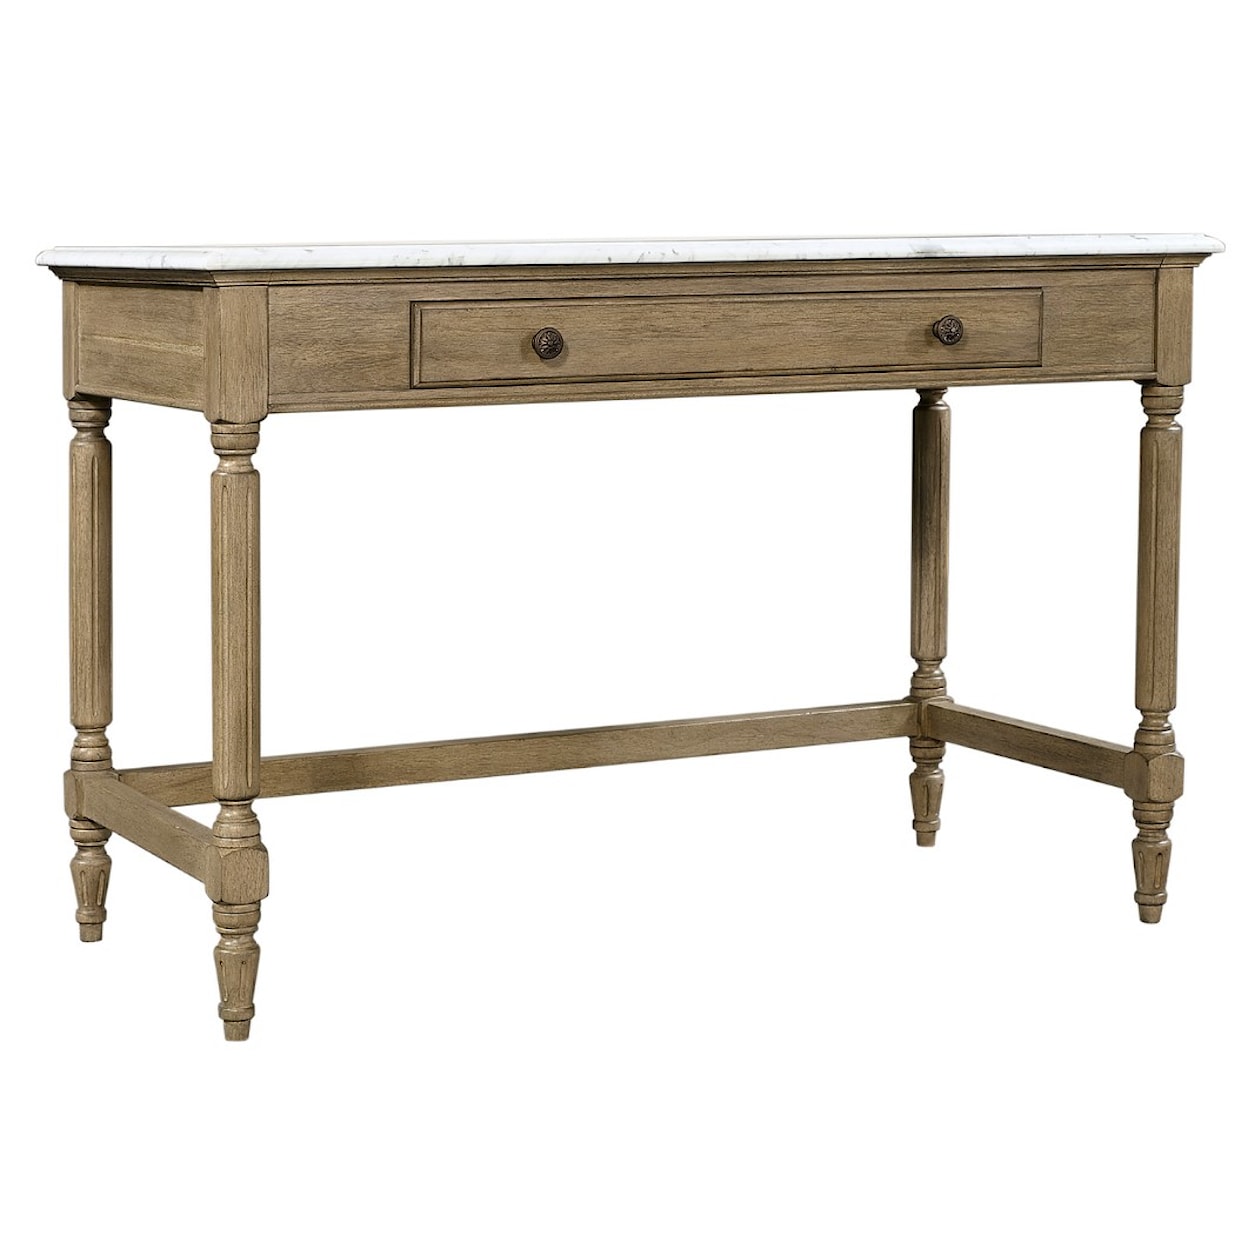 Aspenhome Leah Writing Desk with Marble Top